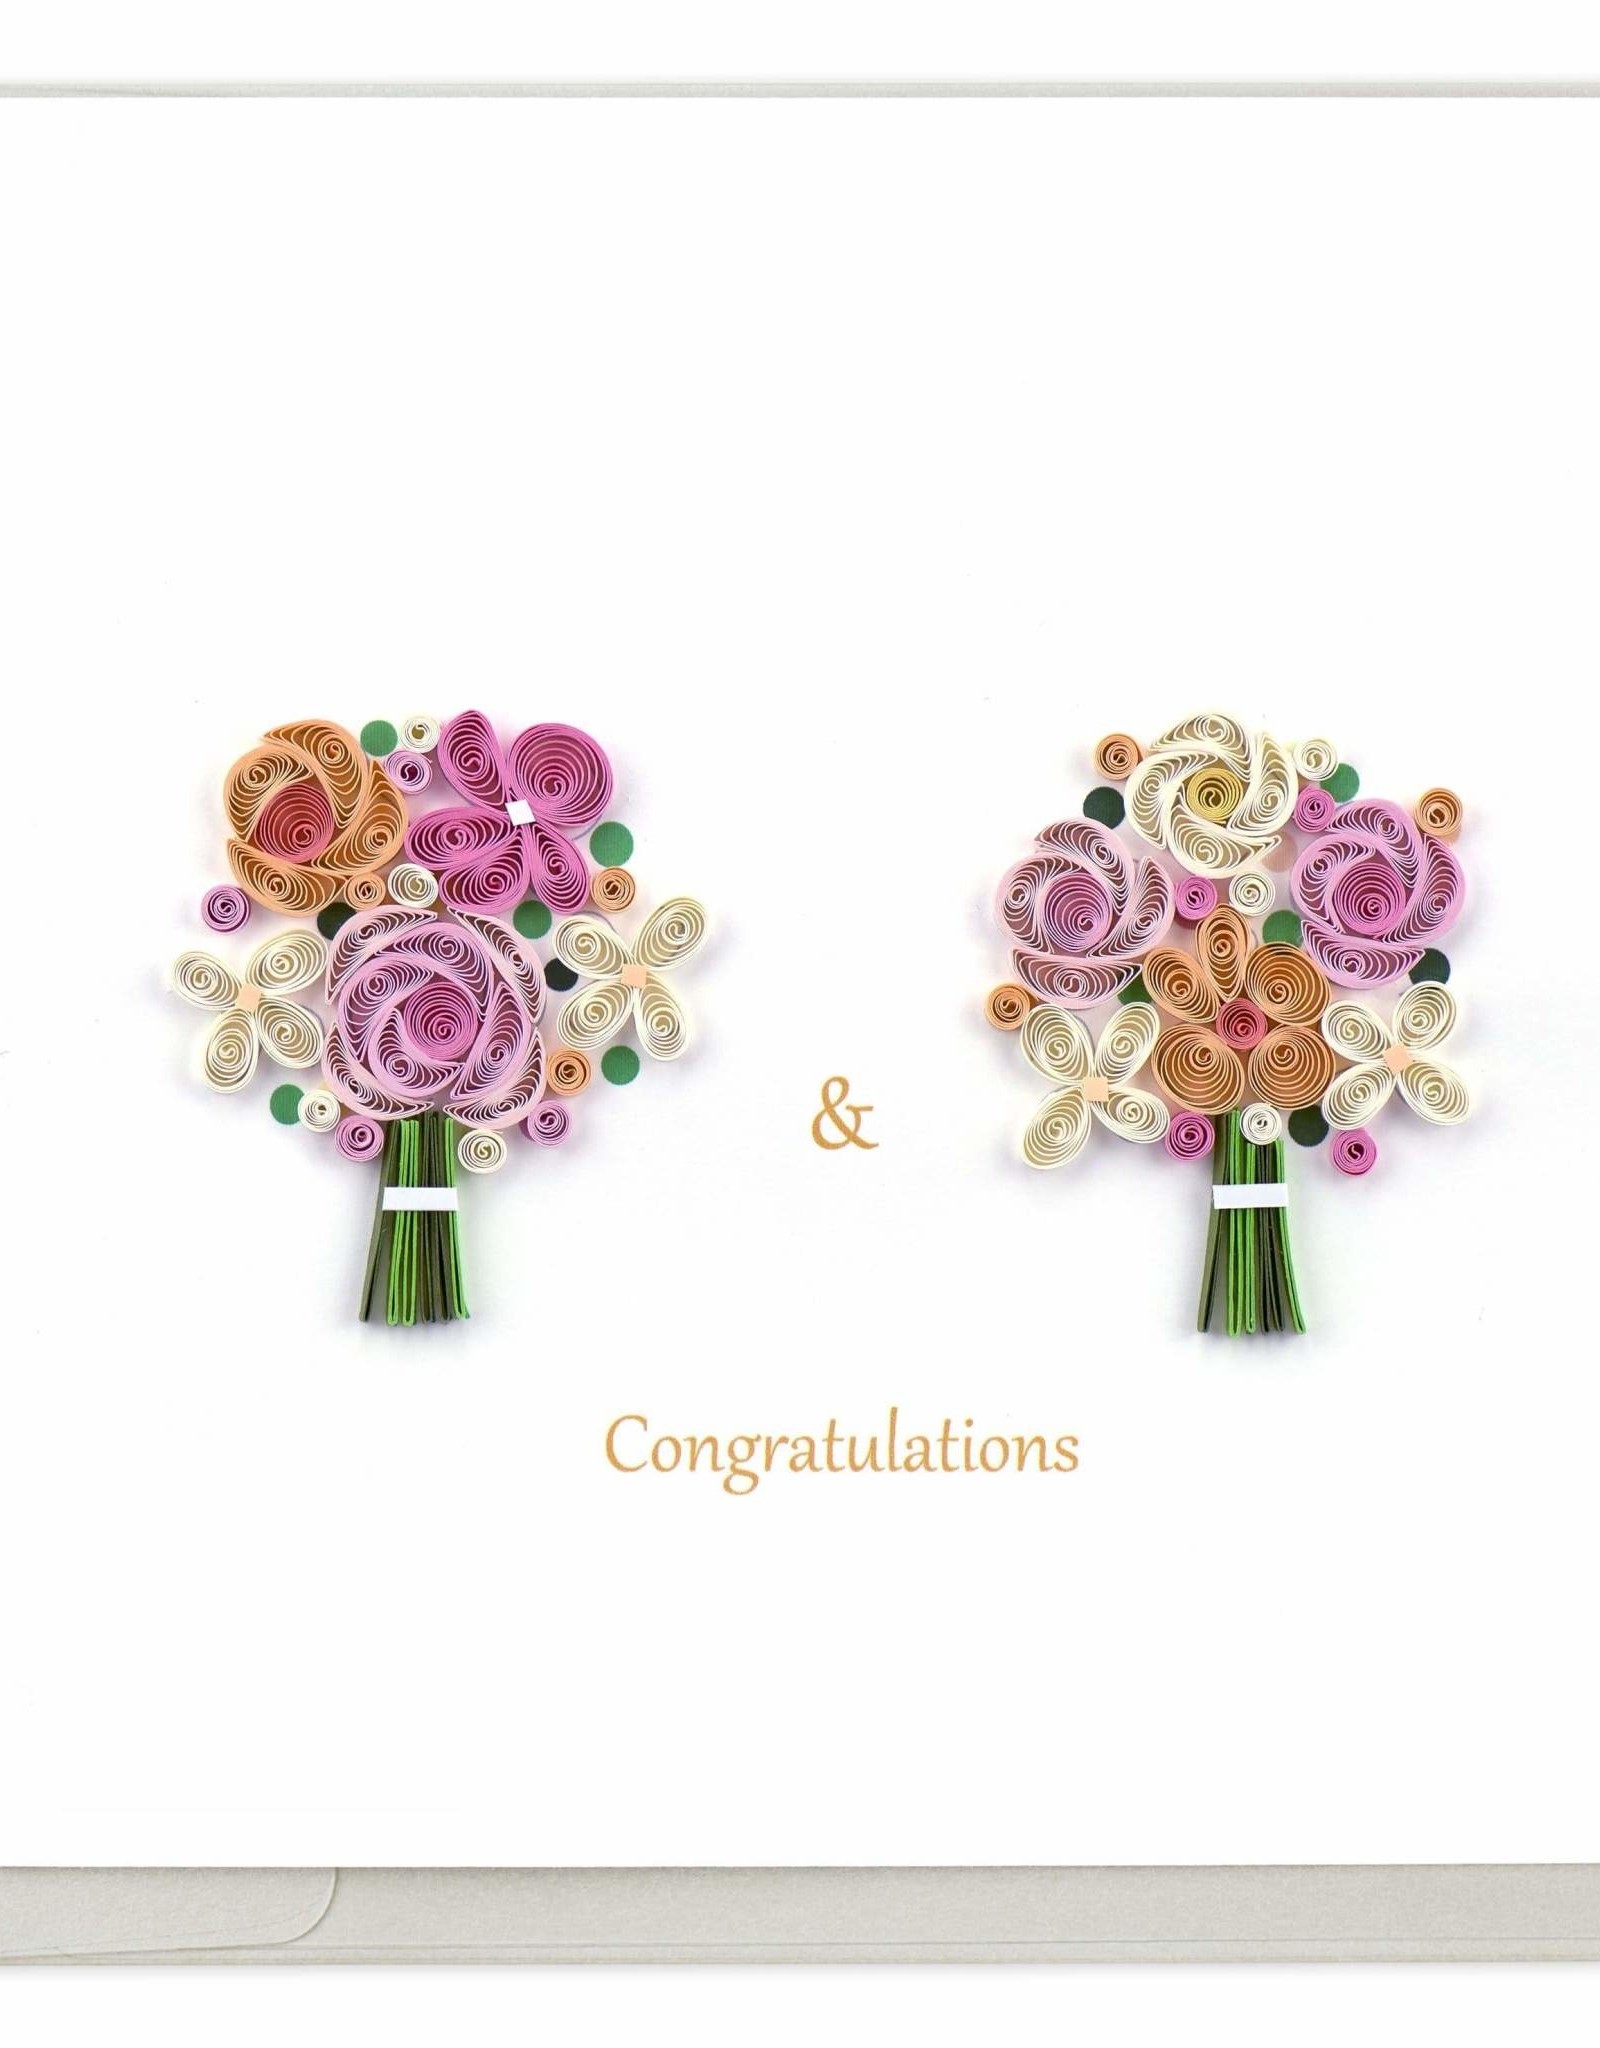 Quilling Card Quilled Two Brides Wedding Card